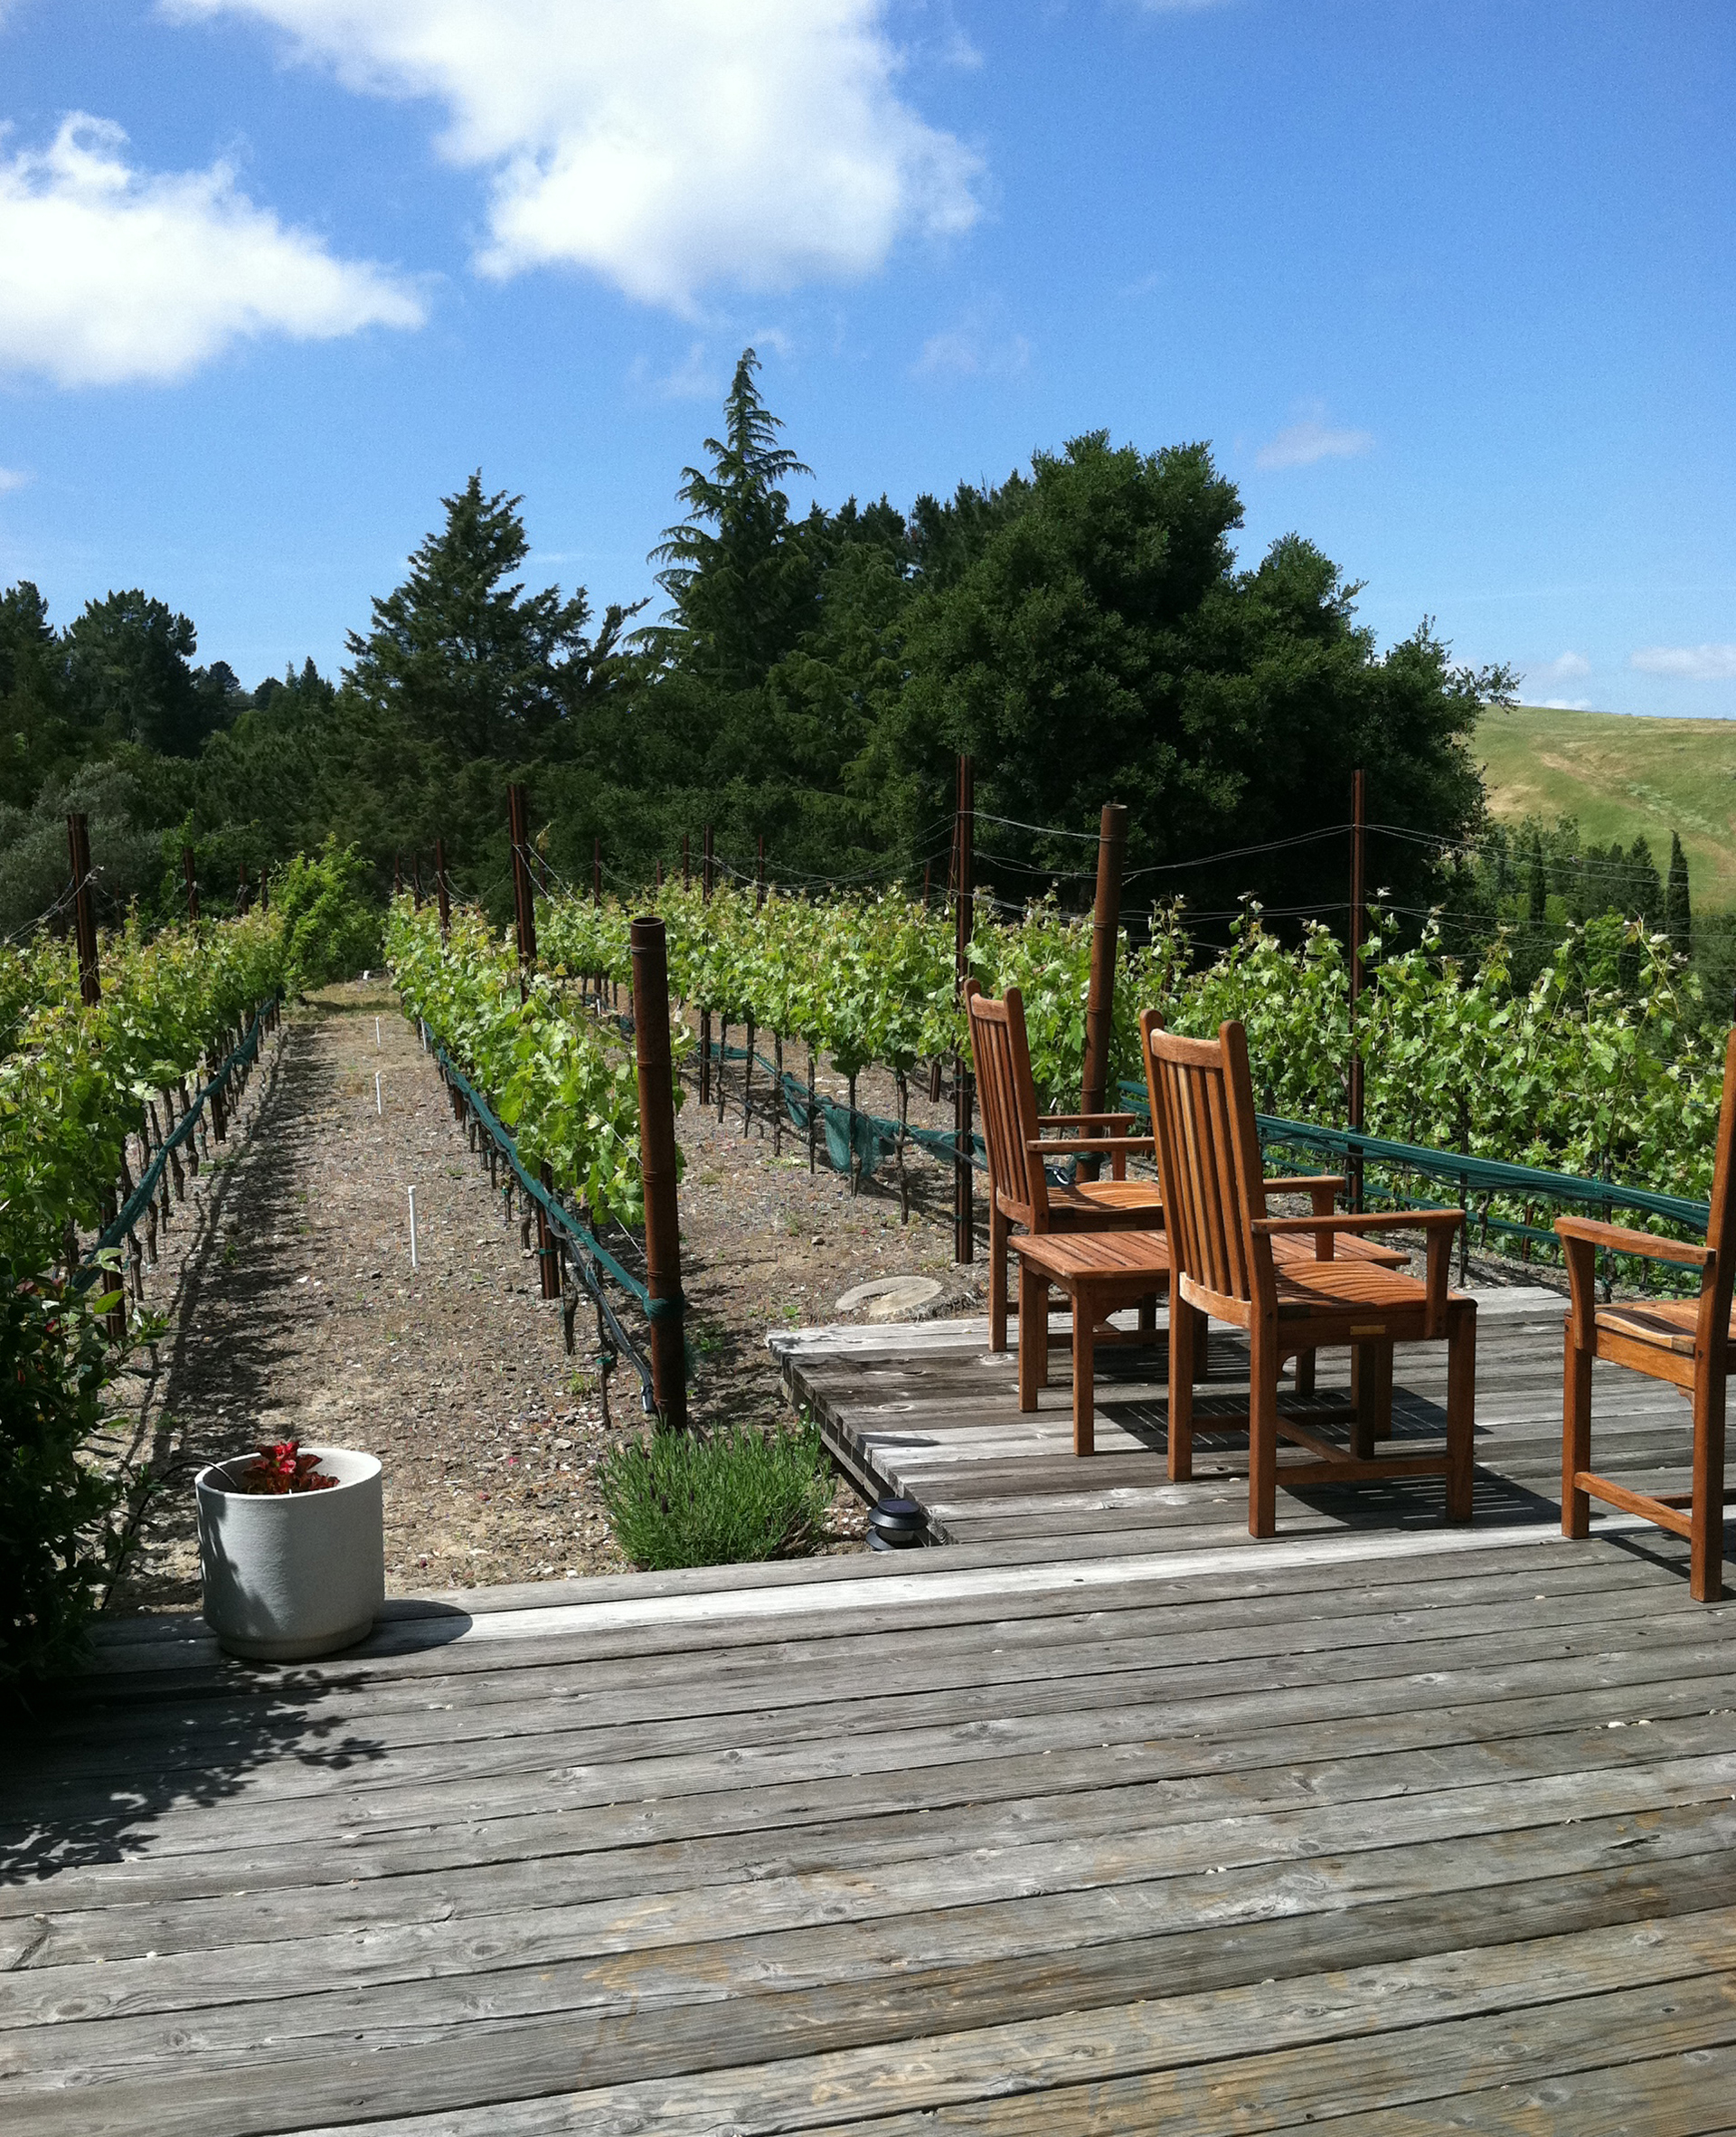 This Lamorinda home vineyard sits next to the deck, where homeowners can admire their orderly rows of cabernet and syrah vines, which grow well in the region.